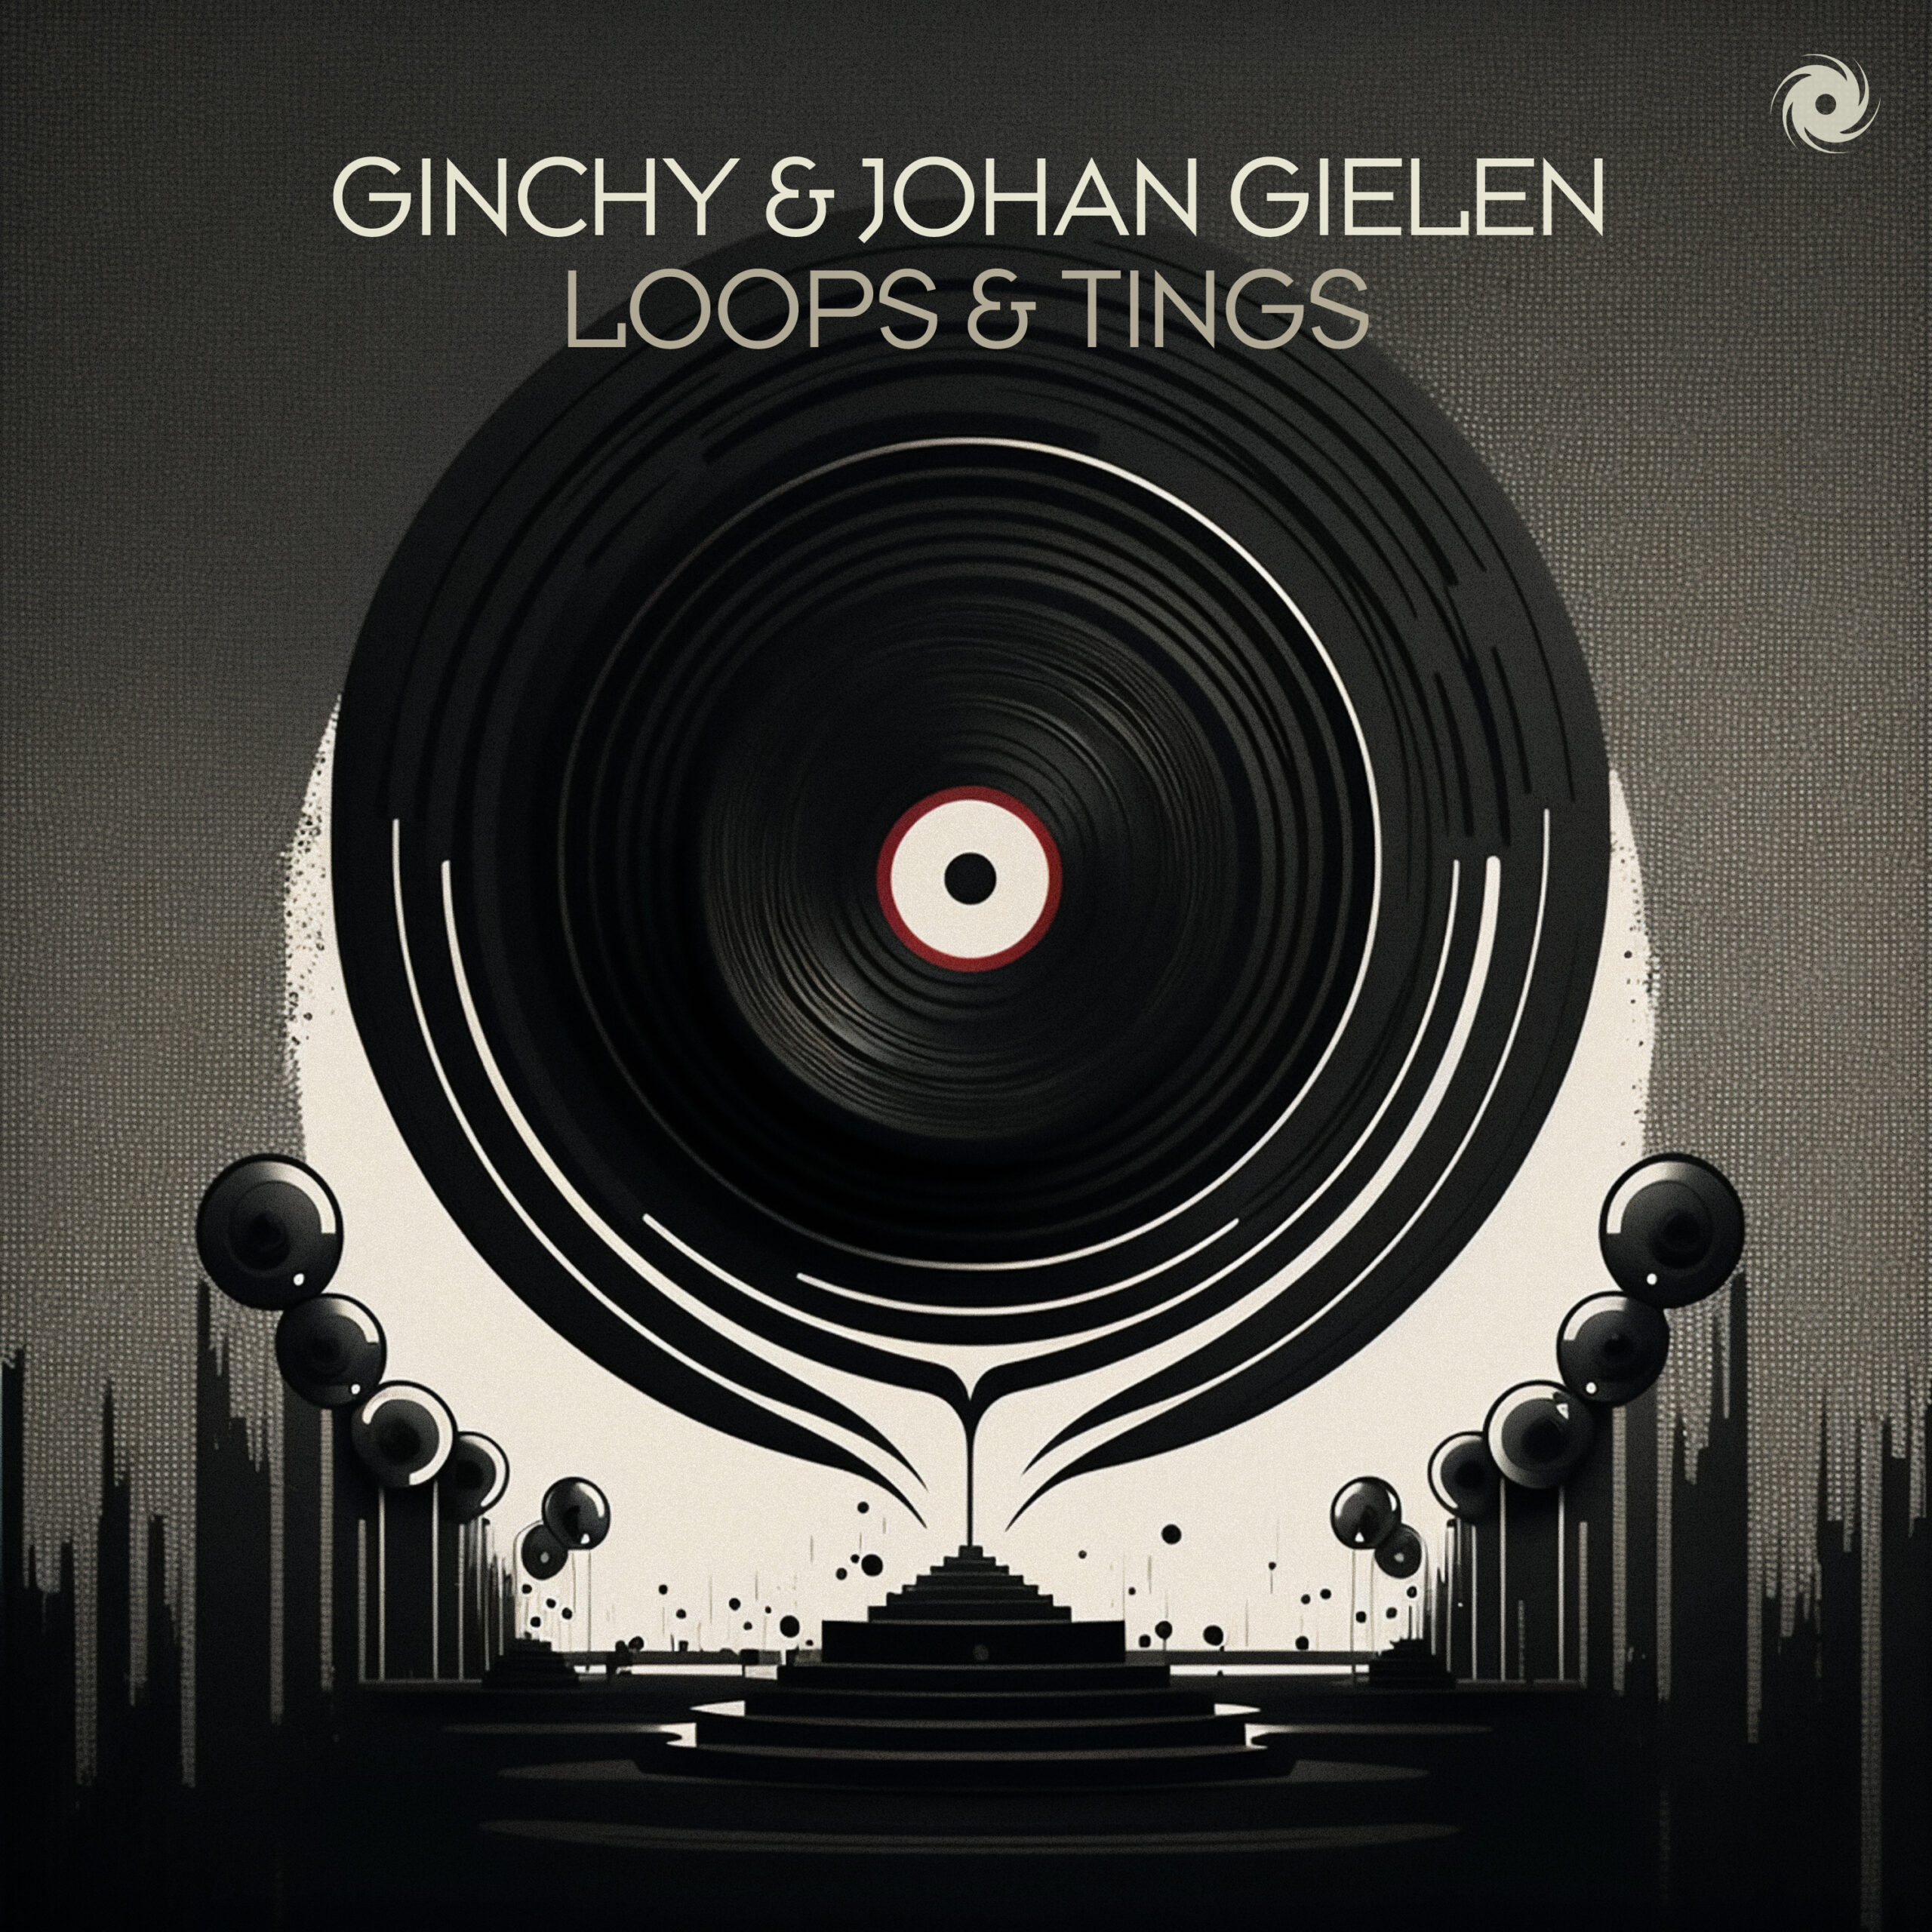 Ginchy & Johan Gielen Bring Electrifying Remake of Loops & Tings